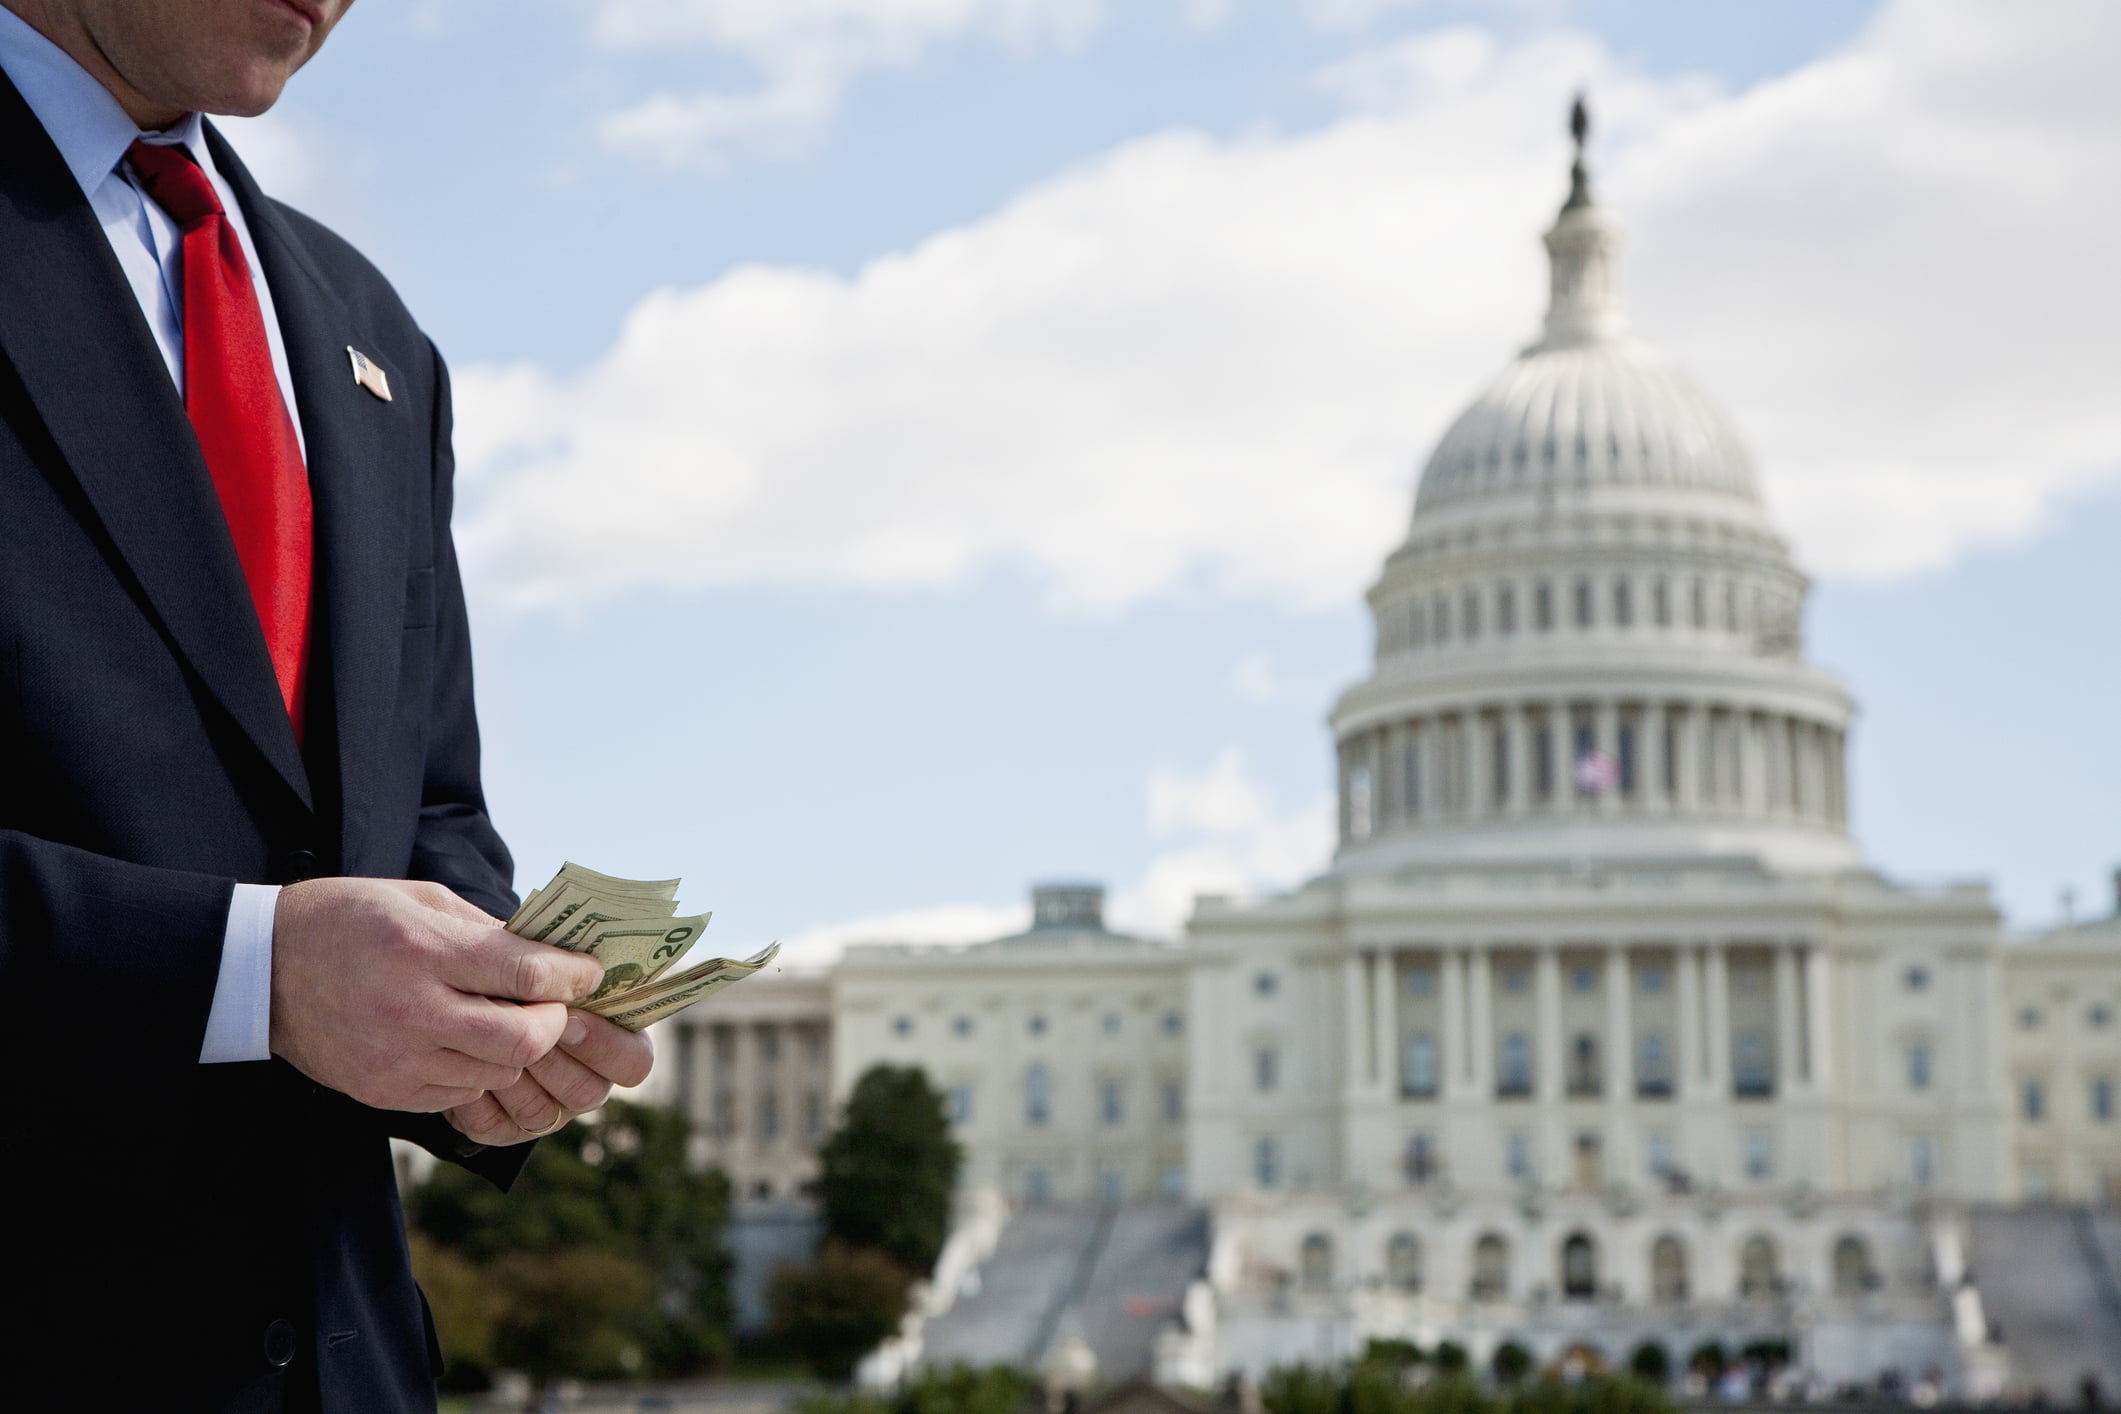 A politician stands outside of the U.S. capitol while counting money